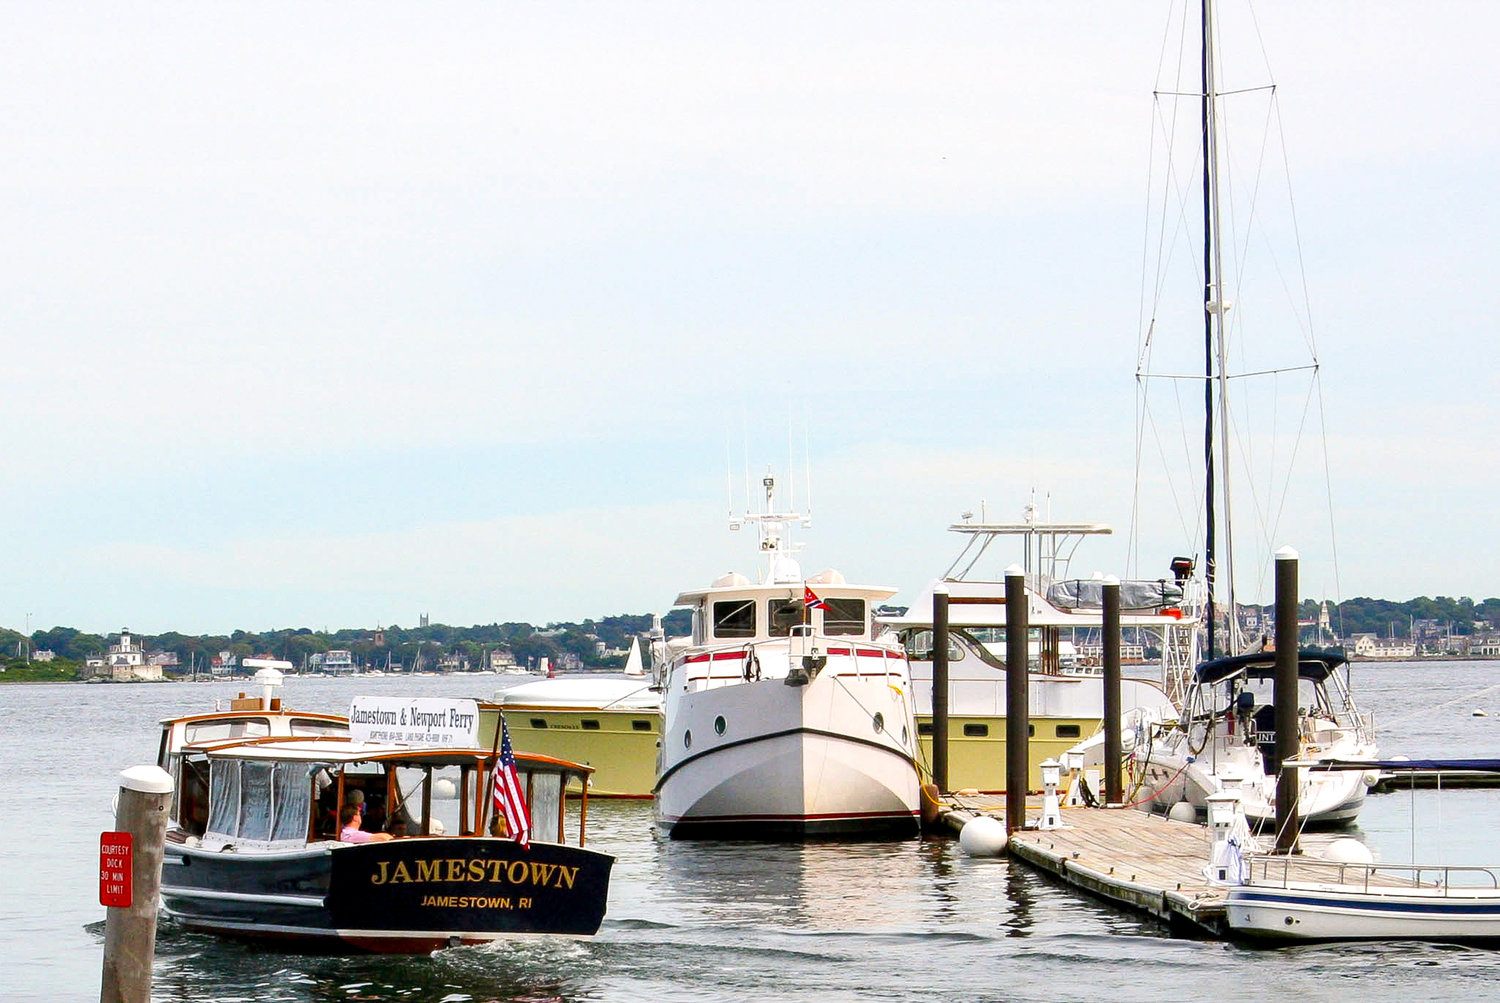 The boating lifestyle is an important one in Rhode Island, especially its southern shores, where the ocean ties to closely to tourism, economy, recreation, and enviornment